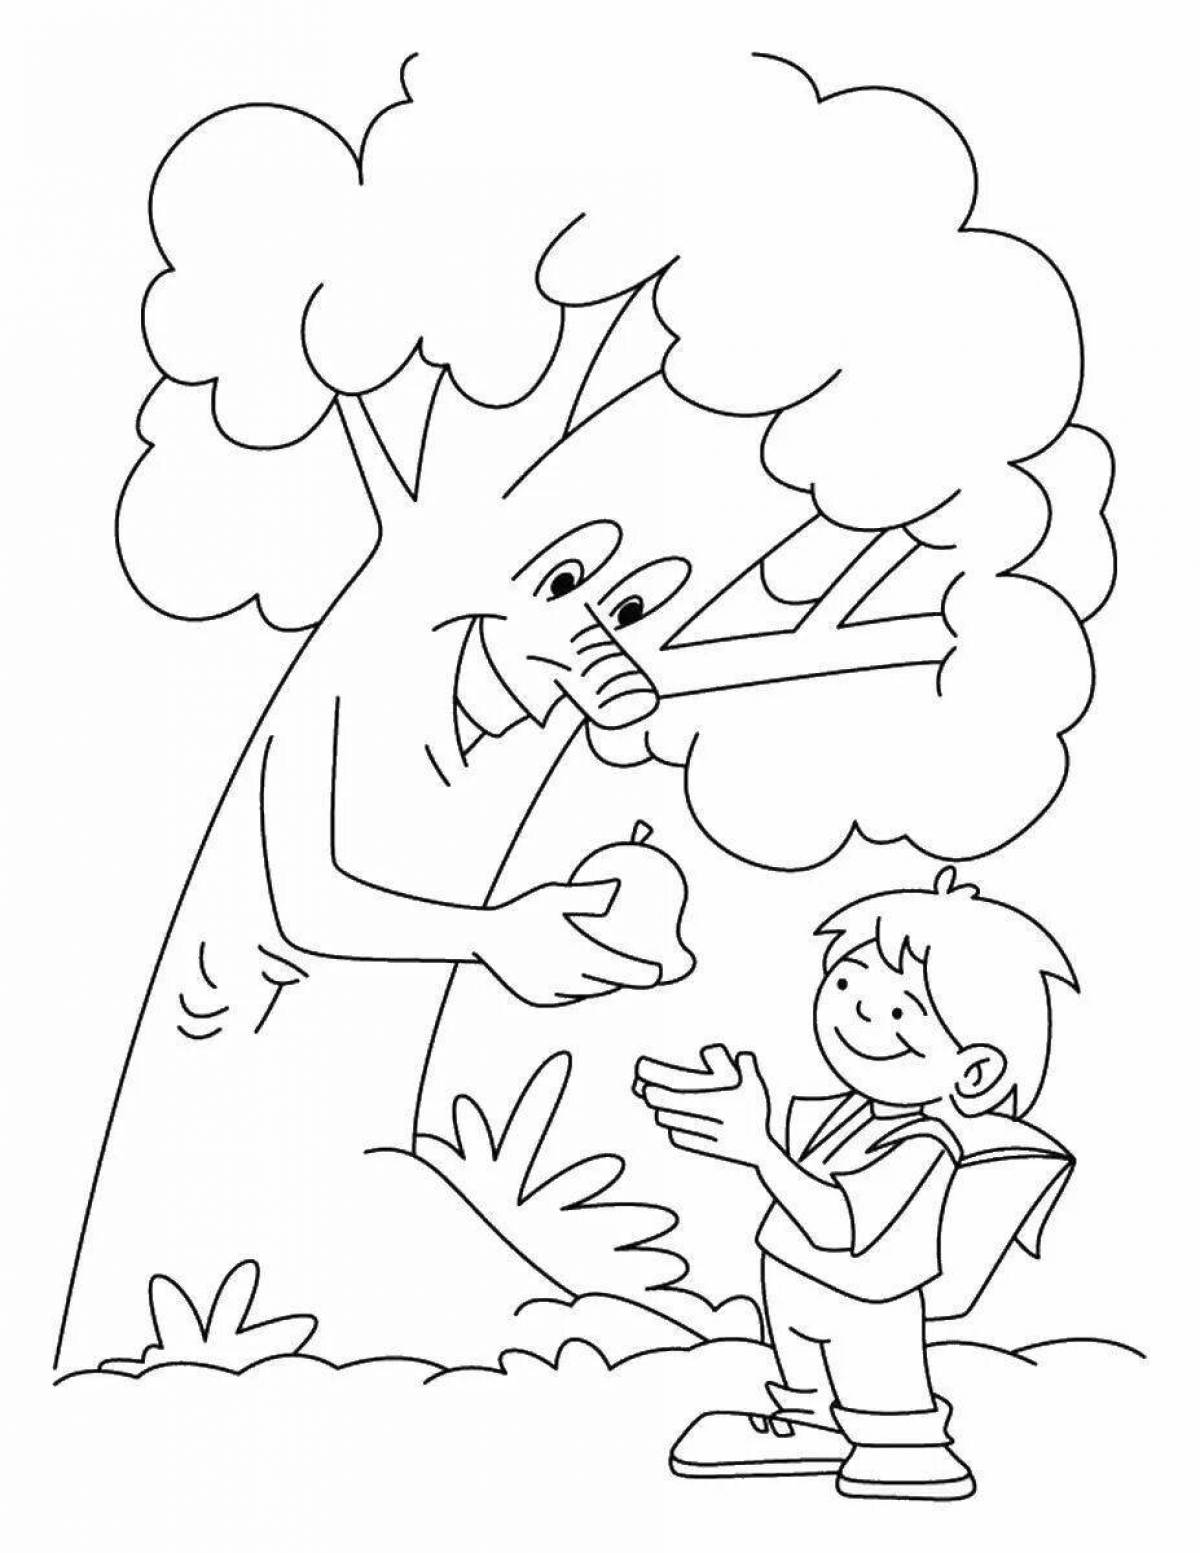 Caring for nature playful eco coloring book